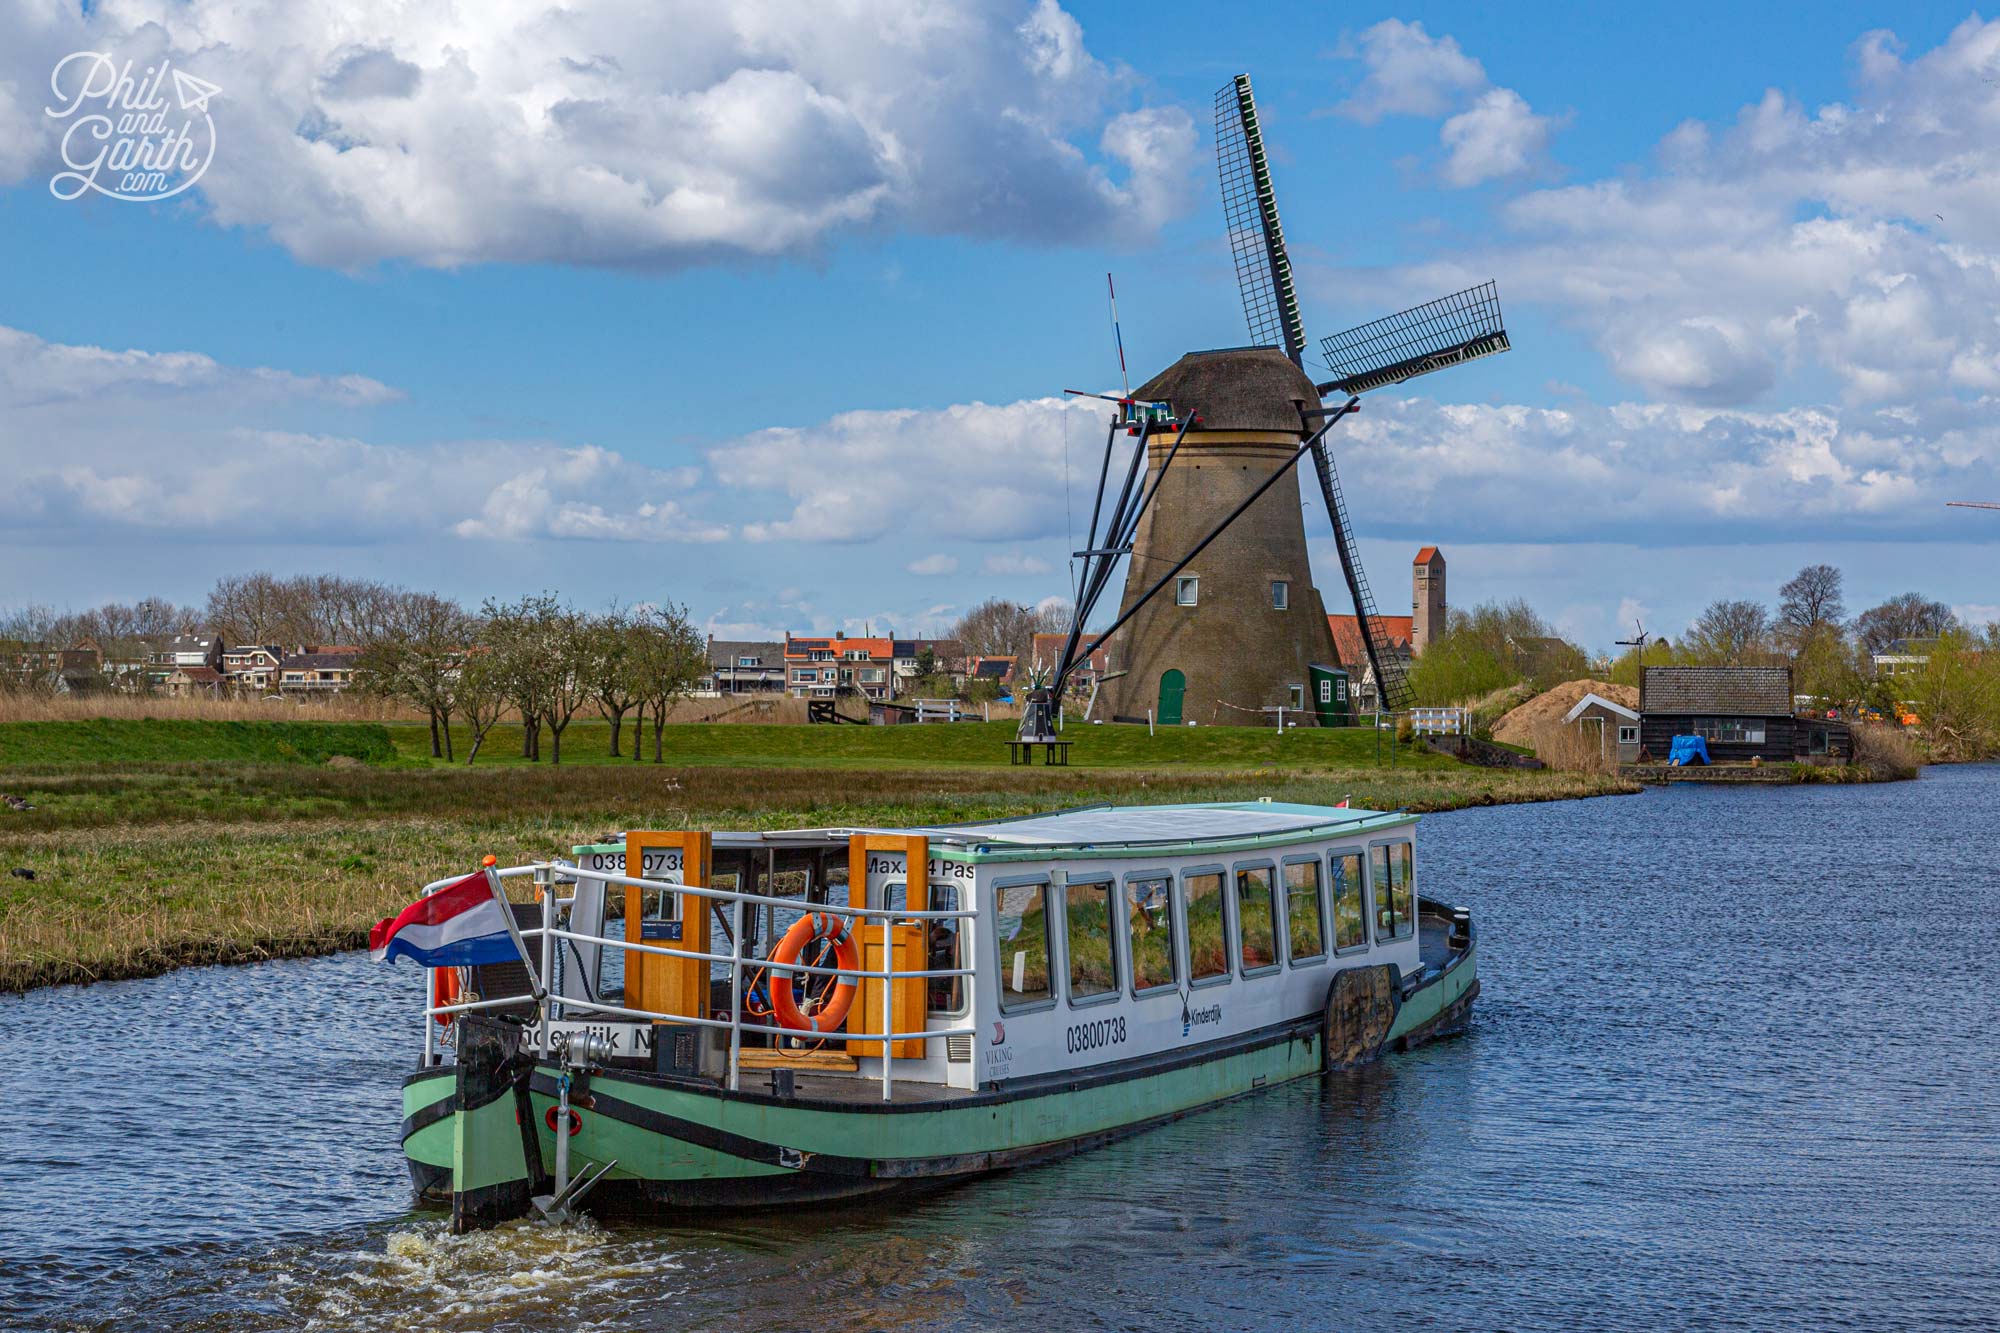 Take in the beautiful scenery along the water on a canal tour boat